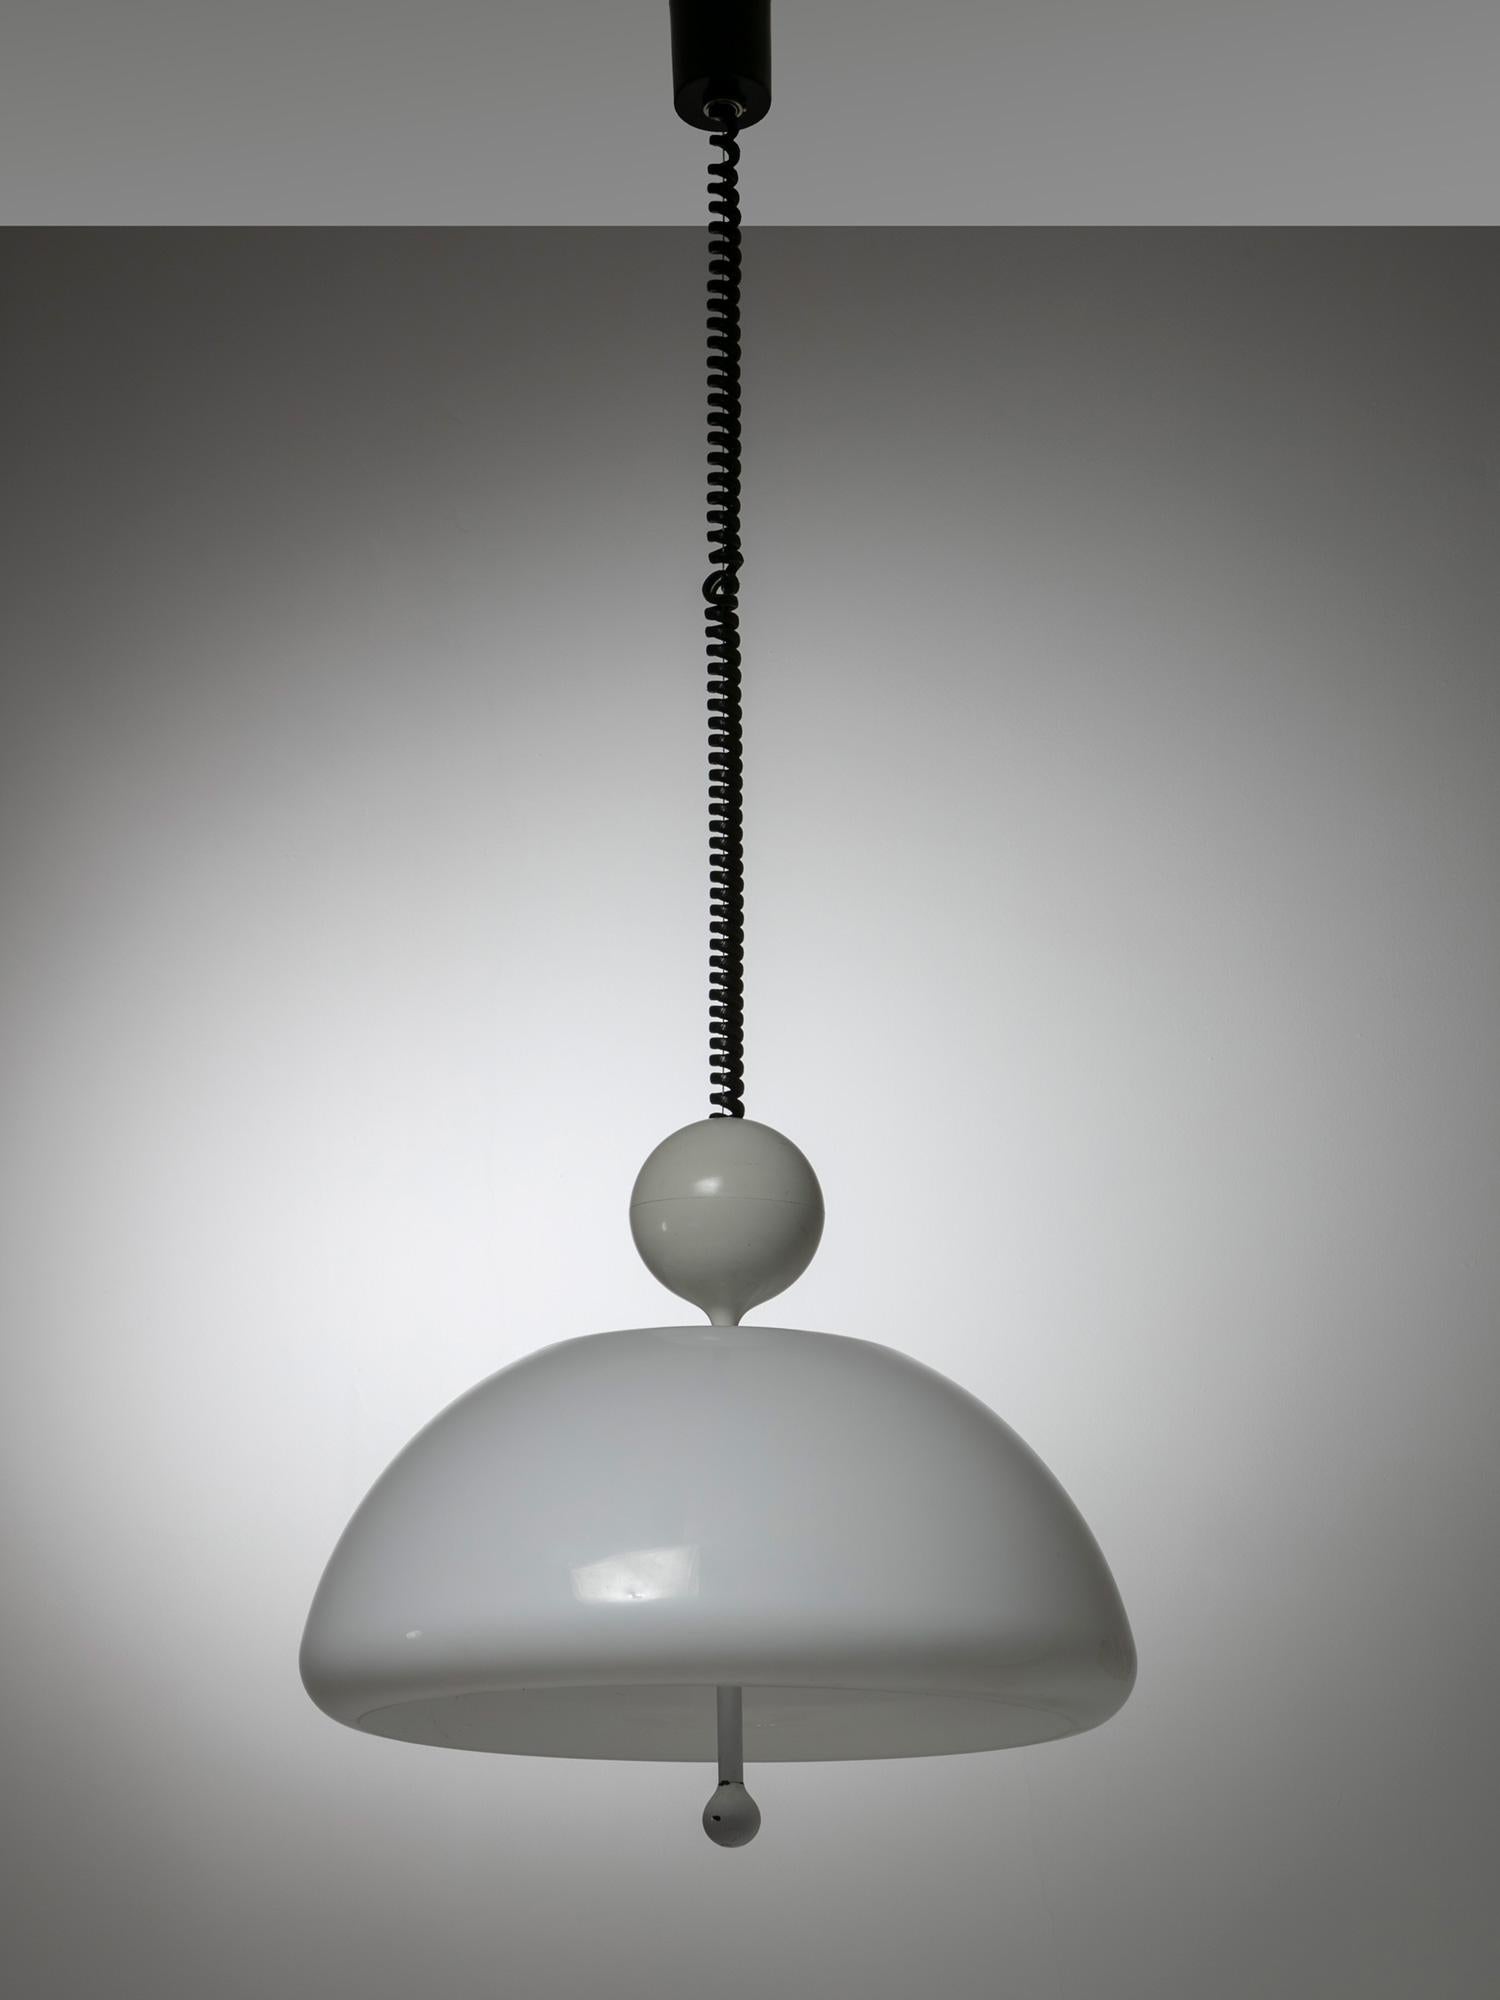 Saliscendi pendant lamp by Elio Martinelli pfr Martinelli Luce.
The latch system is hidden by the upper spherical element, giving a sinuous diffused shape.
The adjustable system is currently not working and the lamp can be restored or used with a